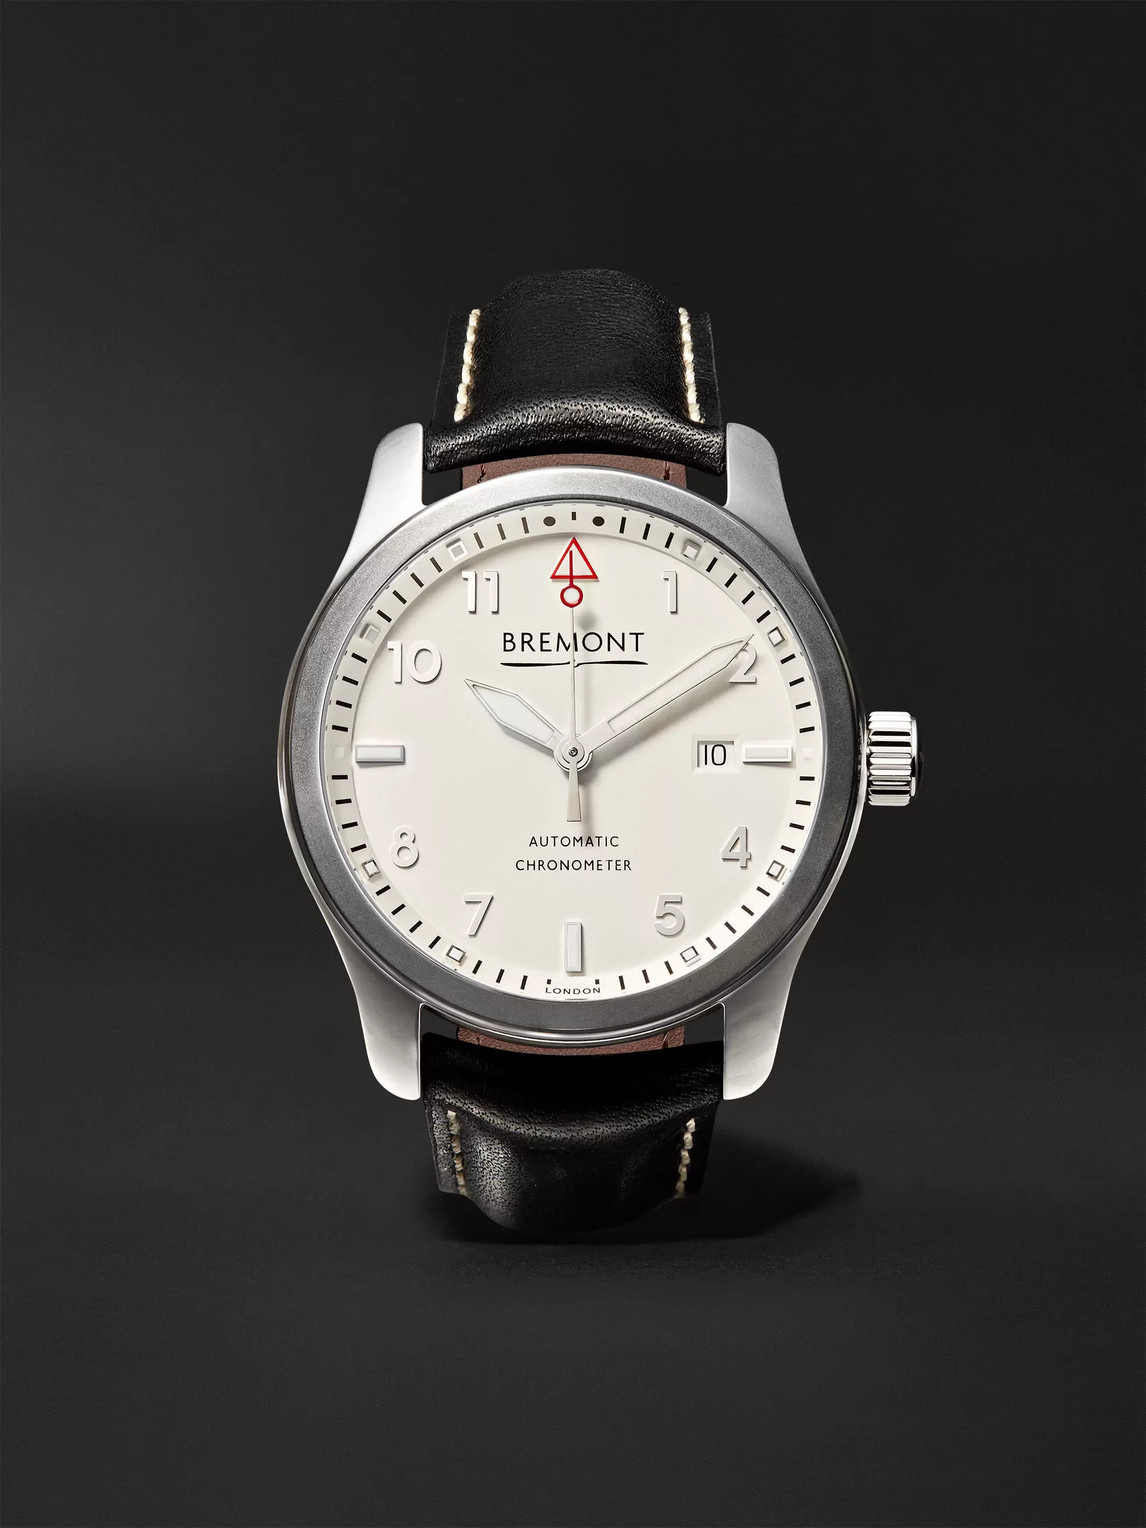 BREMONT SOLO POLISHED WHITE AUTOMATIC 43MM STAINLESS STEEL AND LEATHER WATCH, REF. SOLO43-P-WH-R-S